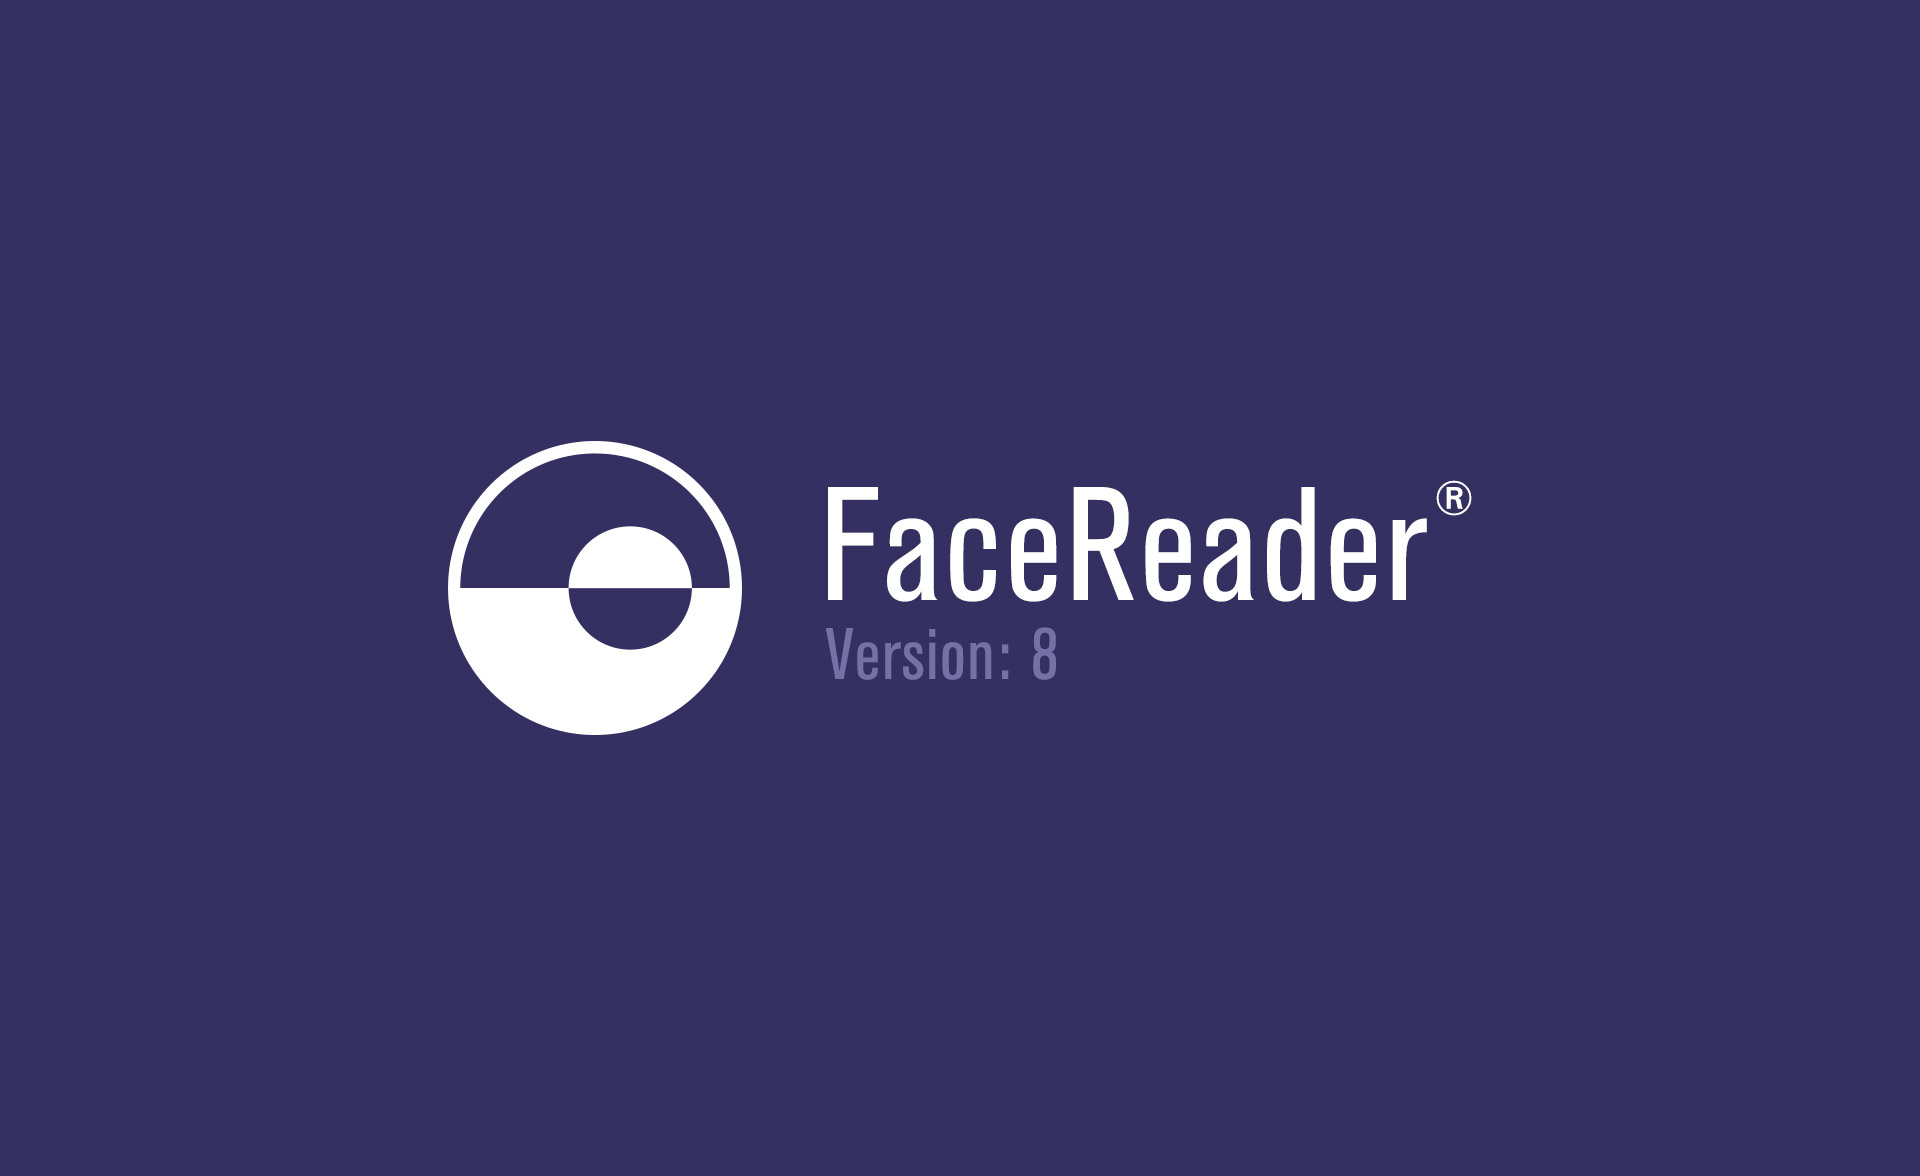 Higher Quality Results with FaceReader 8!